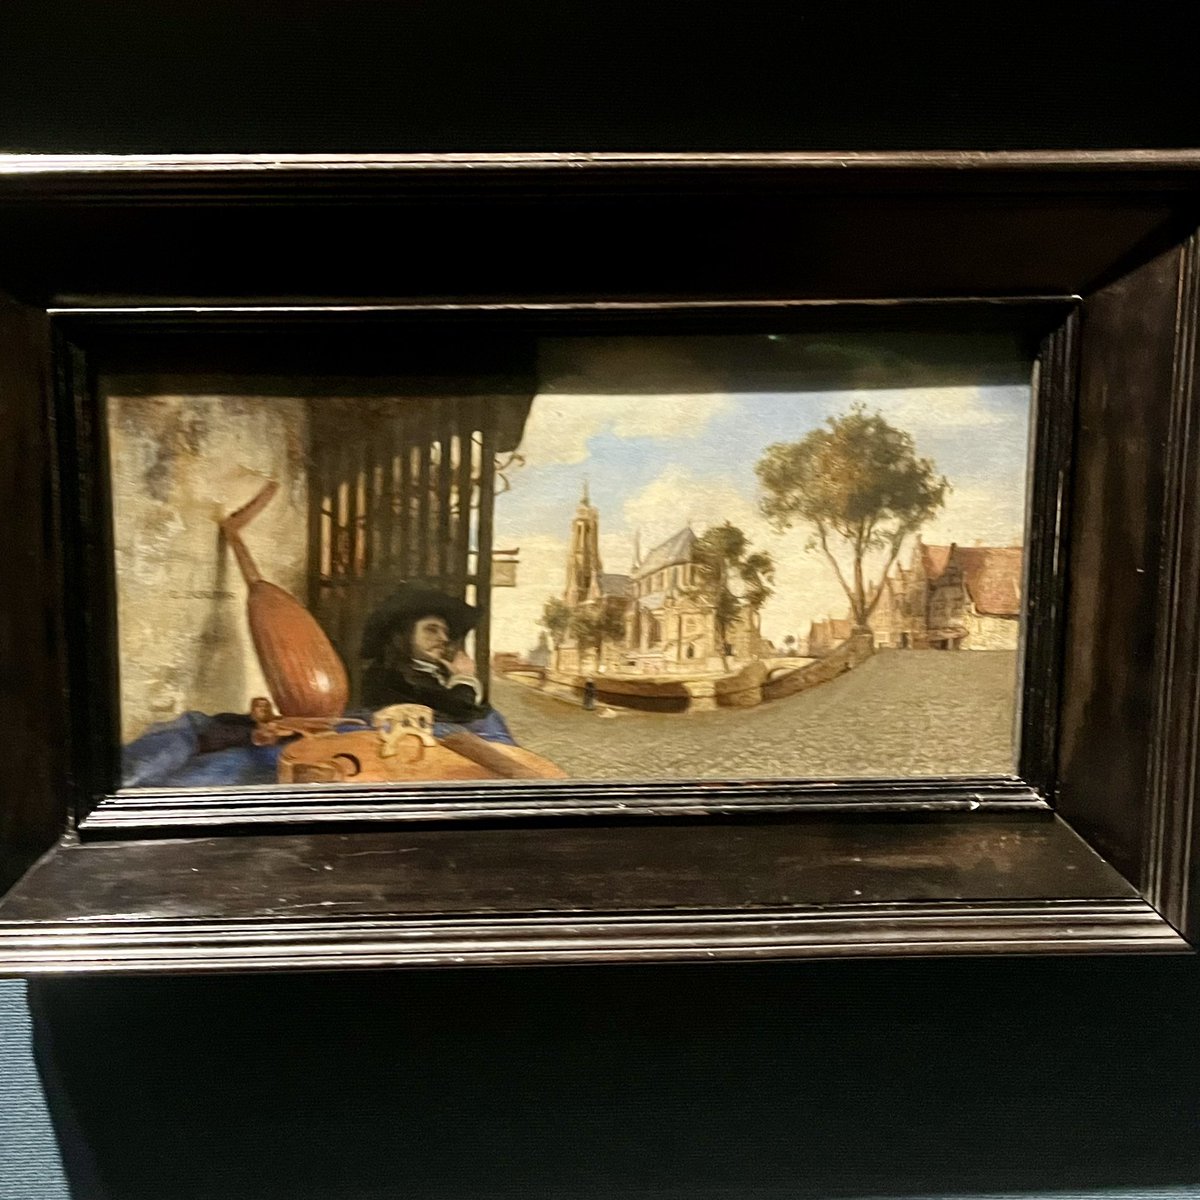 Ended 2023 with pilgrimage to @nationalgallery to find this enigmatic chap in Carel Fabritius A View of Delft, the tiny painting central to @LauraCummingArt ‘s brilliant book #Thunderclap Testament to LC’s sharp discerning eye, he’s easy to miss but utterly compelling (Rm 16)